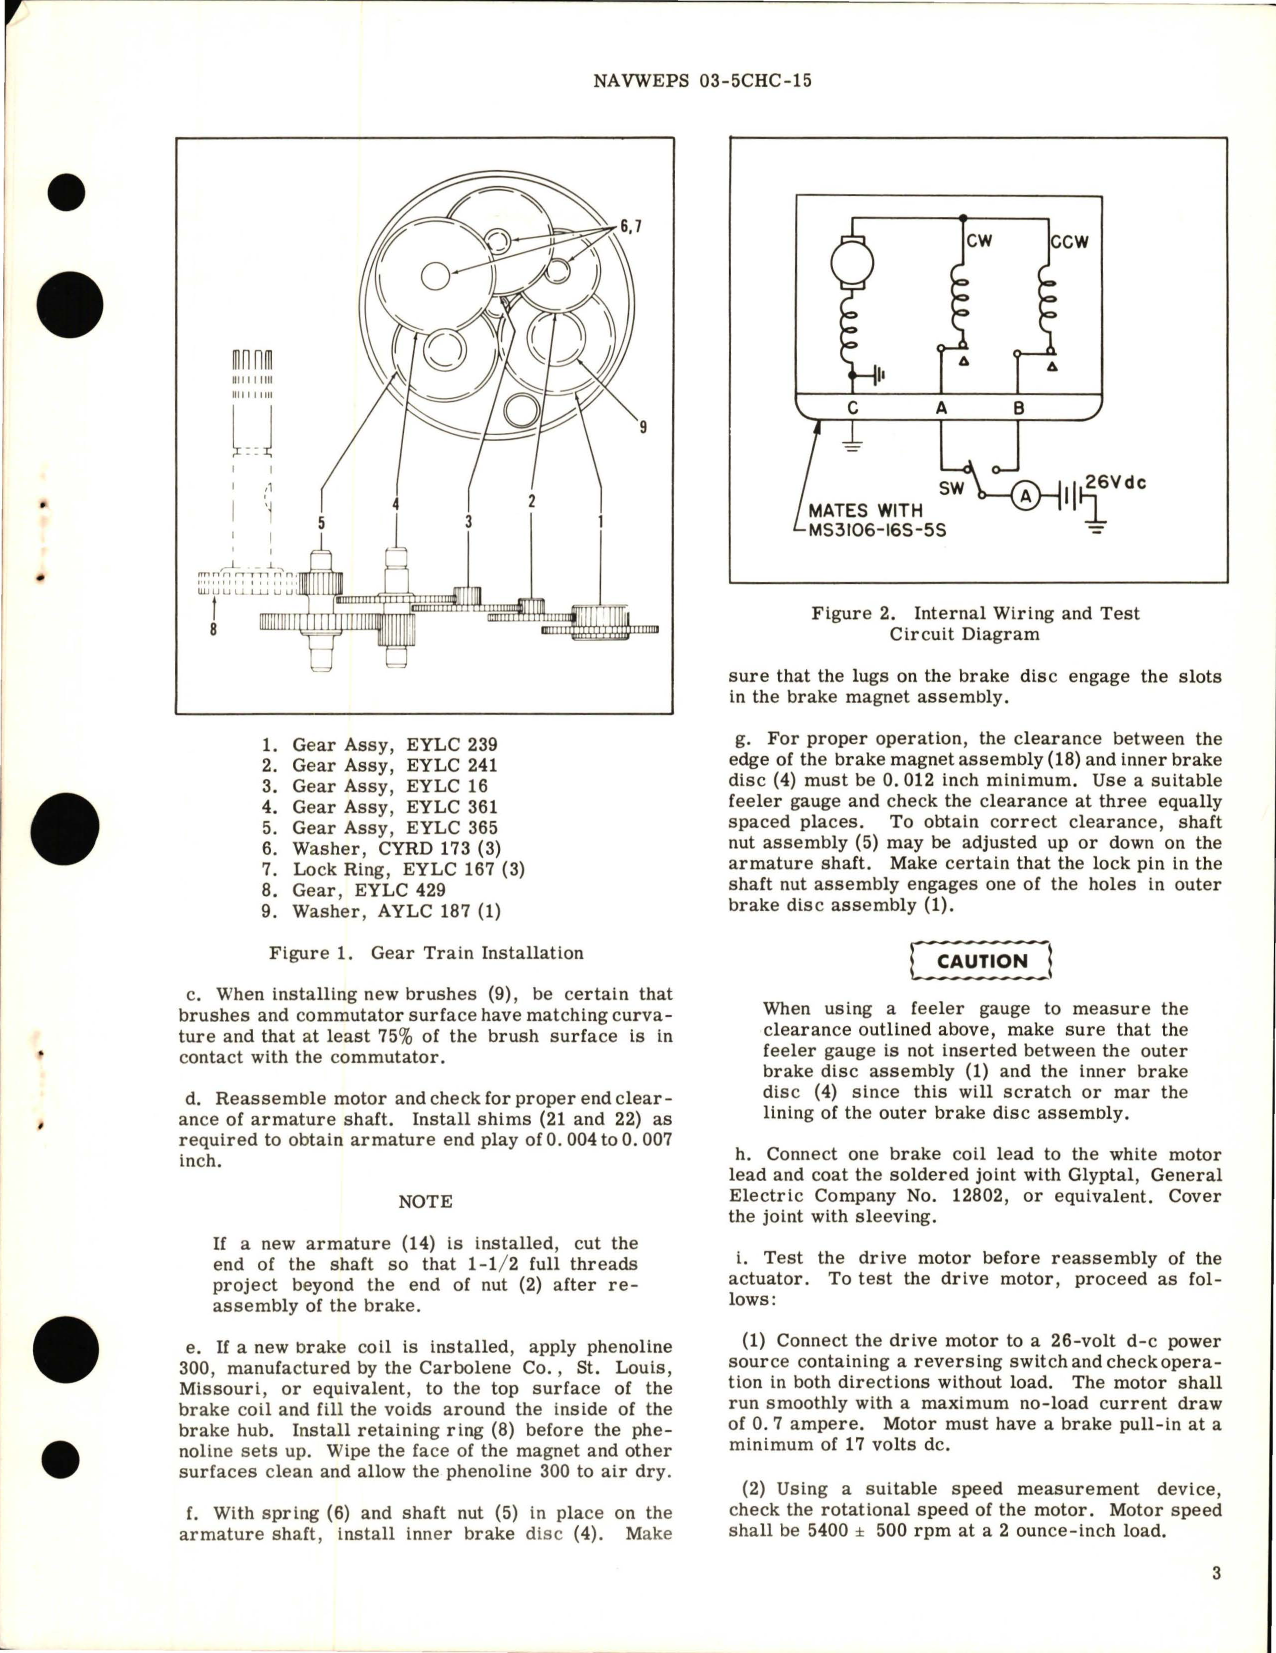 Sample page 5 from AirCorps Library document: Overhaul Instructions with Illustrated Parts Breakdown for Electromechanical Rotary Actuator - Part EYLC 3757-3 